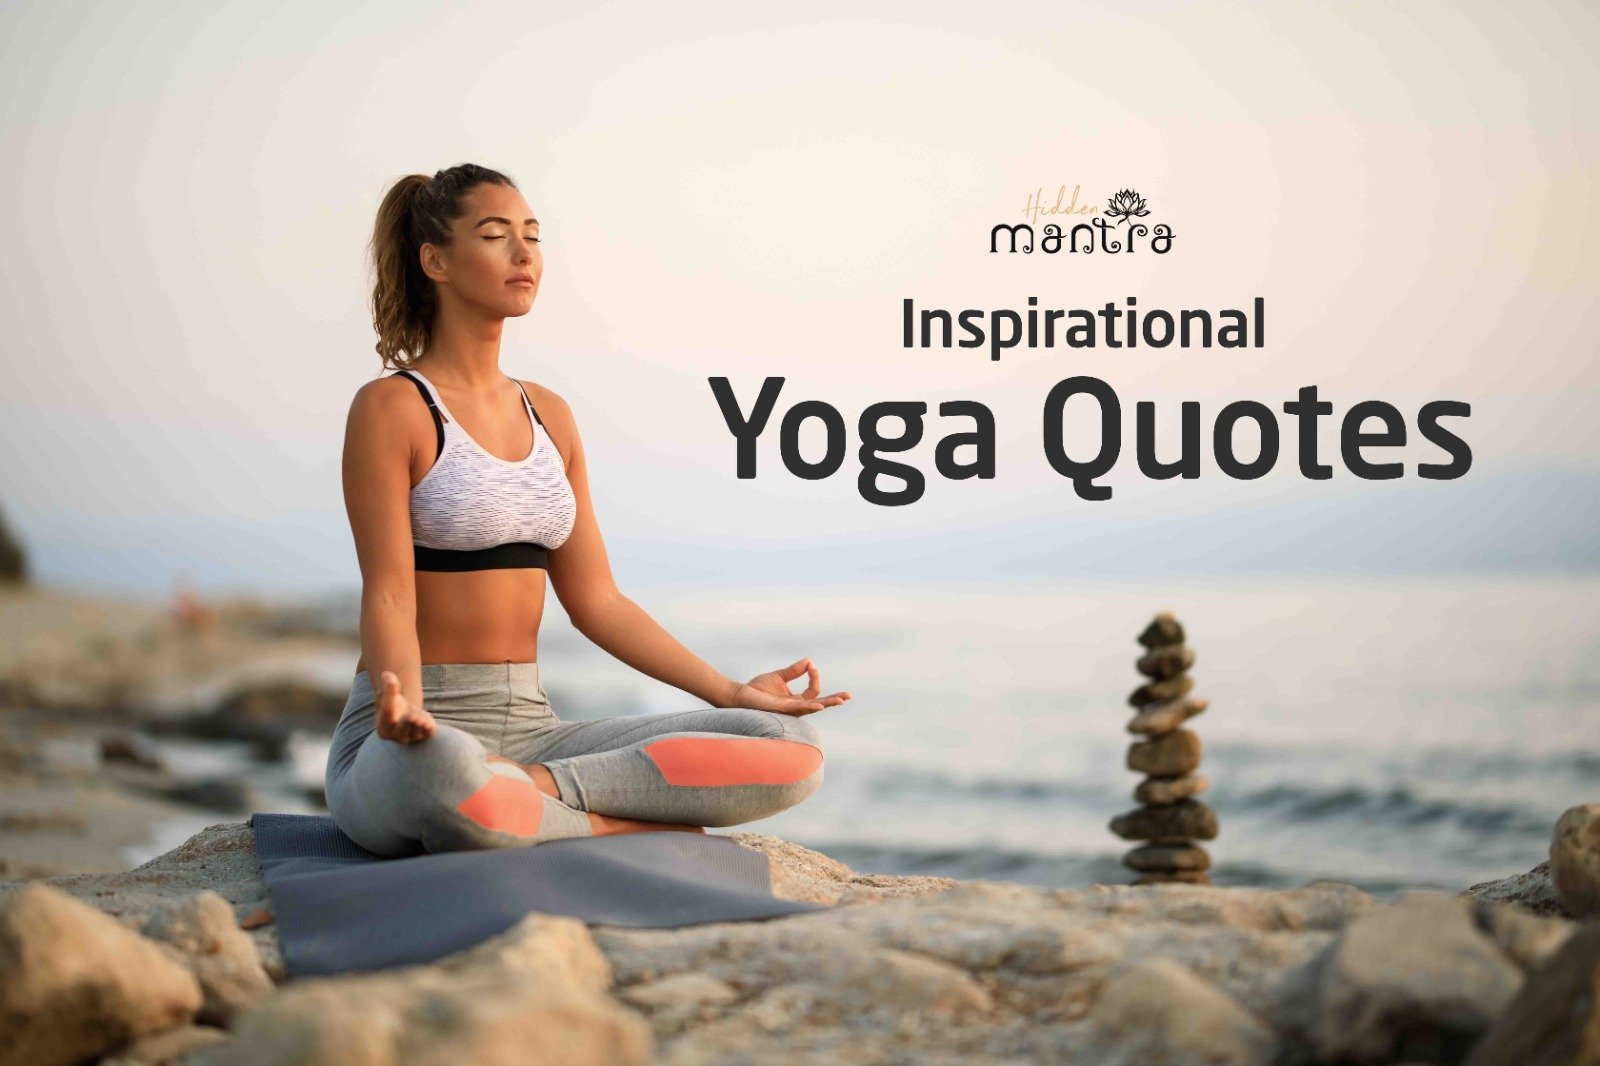 43 Yoga Quotes to Inspire Your Practice  Yoga quotes, Yoga inspiration  quotes, Yoga motivation